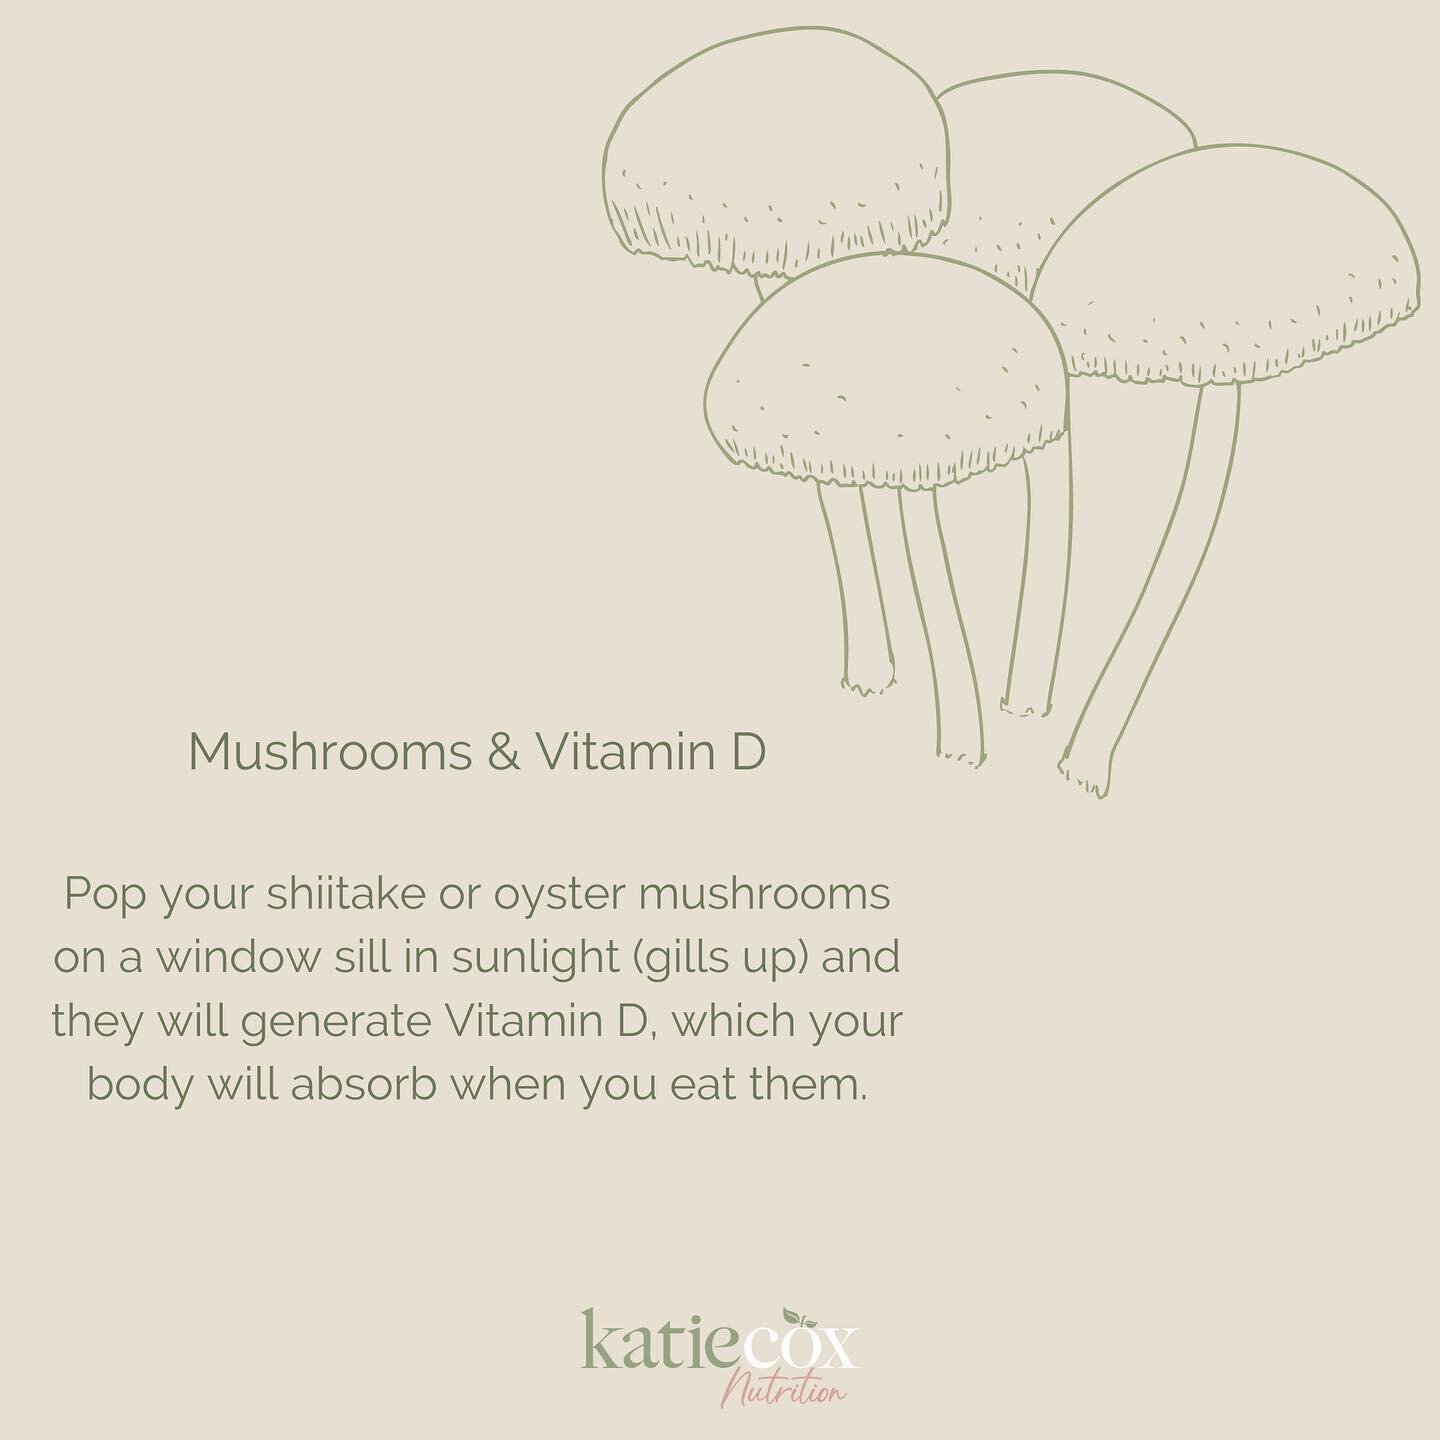 〰️Friday Fact〰️

🍄Mushrooms and Vitamin D🌞

Pop your shiitake or oyster mushrooms on a window sill in sunlight (gills up) and they will generate Vitamin D, which your body will absorb when you eat them!

#fridayfact #brisbanenutritionist #mushrooms